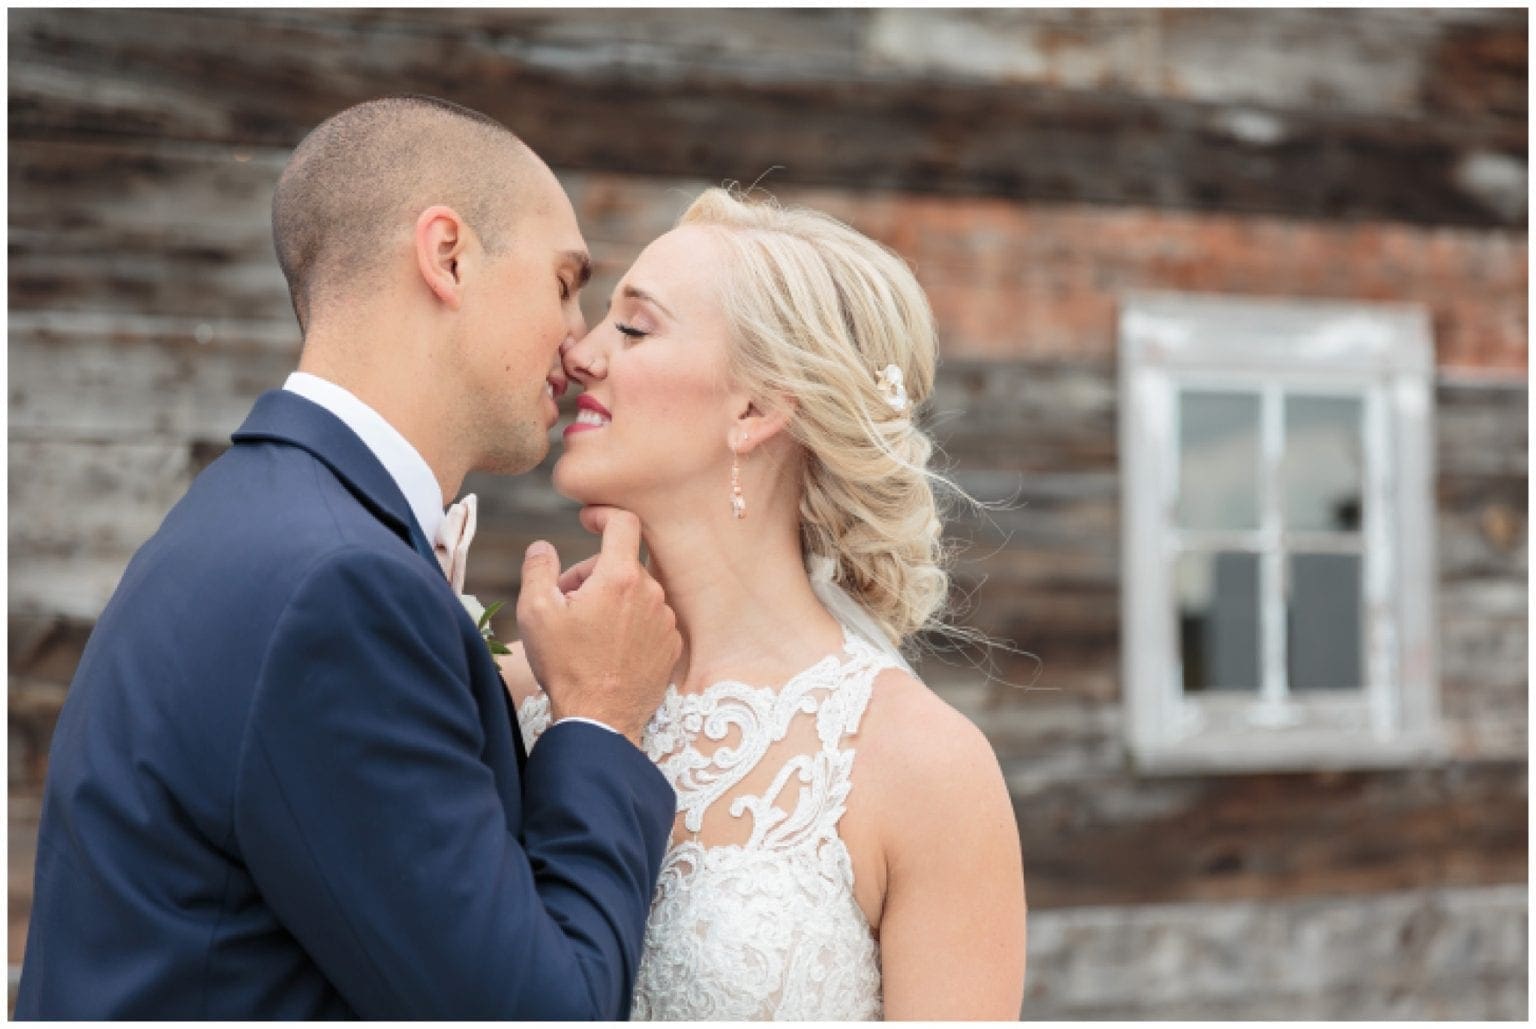 Heritage Prairie Farms Wedding - Wes Craft Photography